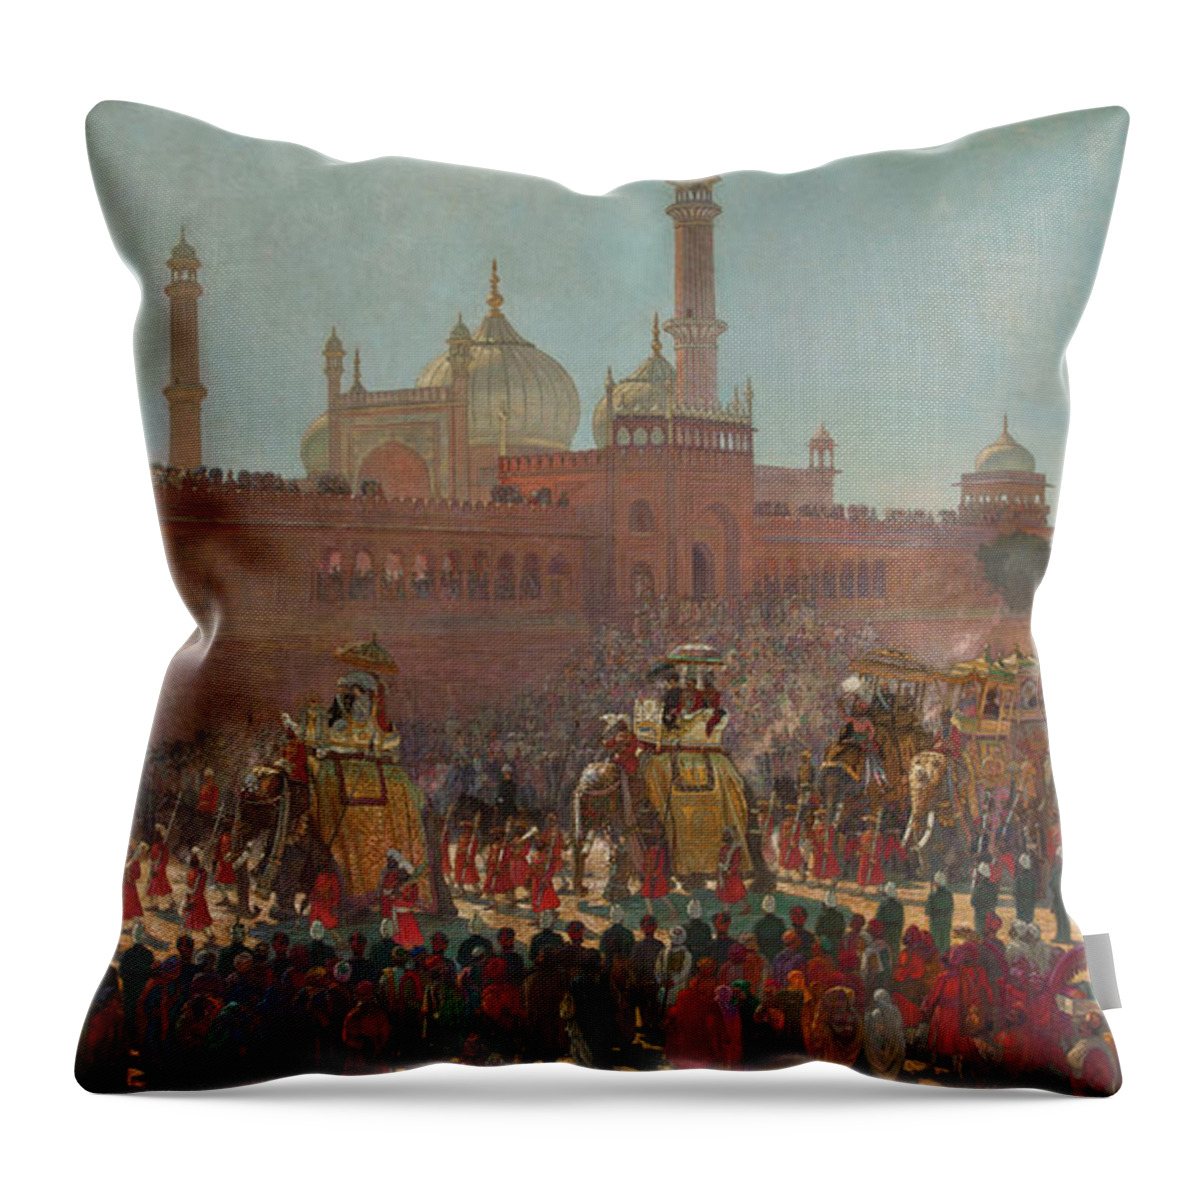 20th Century Throw Pillow featuring the painting The State Entry Into Delhi, 1907 by Roderick D Mackenzie